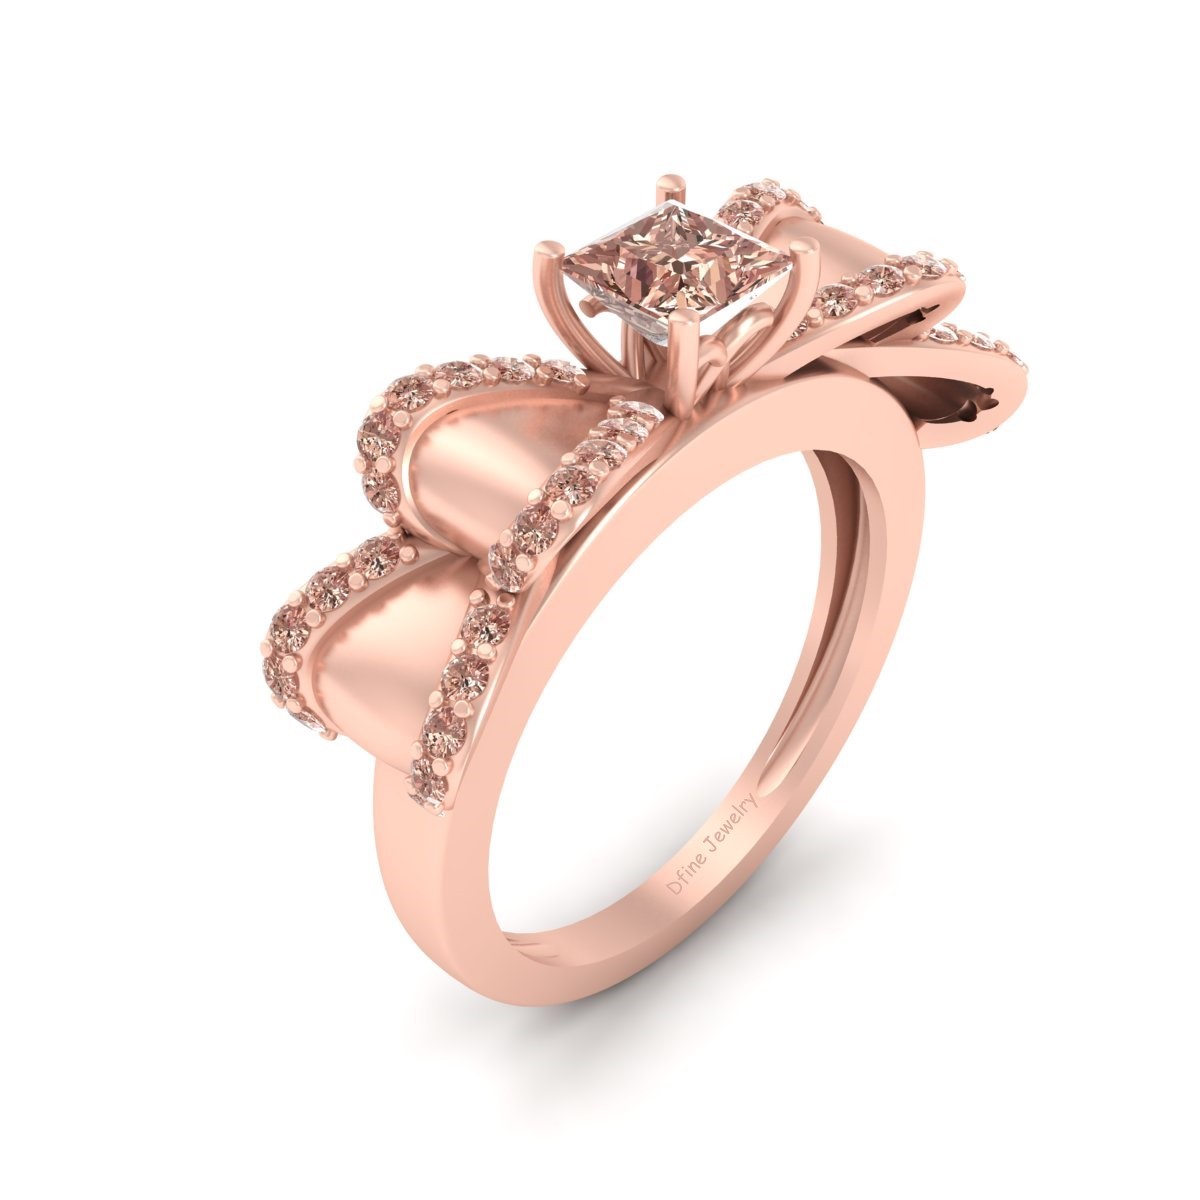 Solid 14k Rose Gold Engagement Ring Women Ribbon Bow Ring Champagne Diamond Ring - $959.99